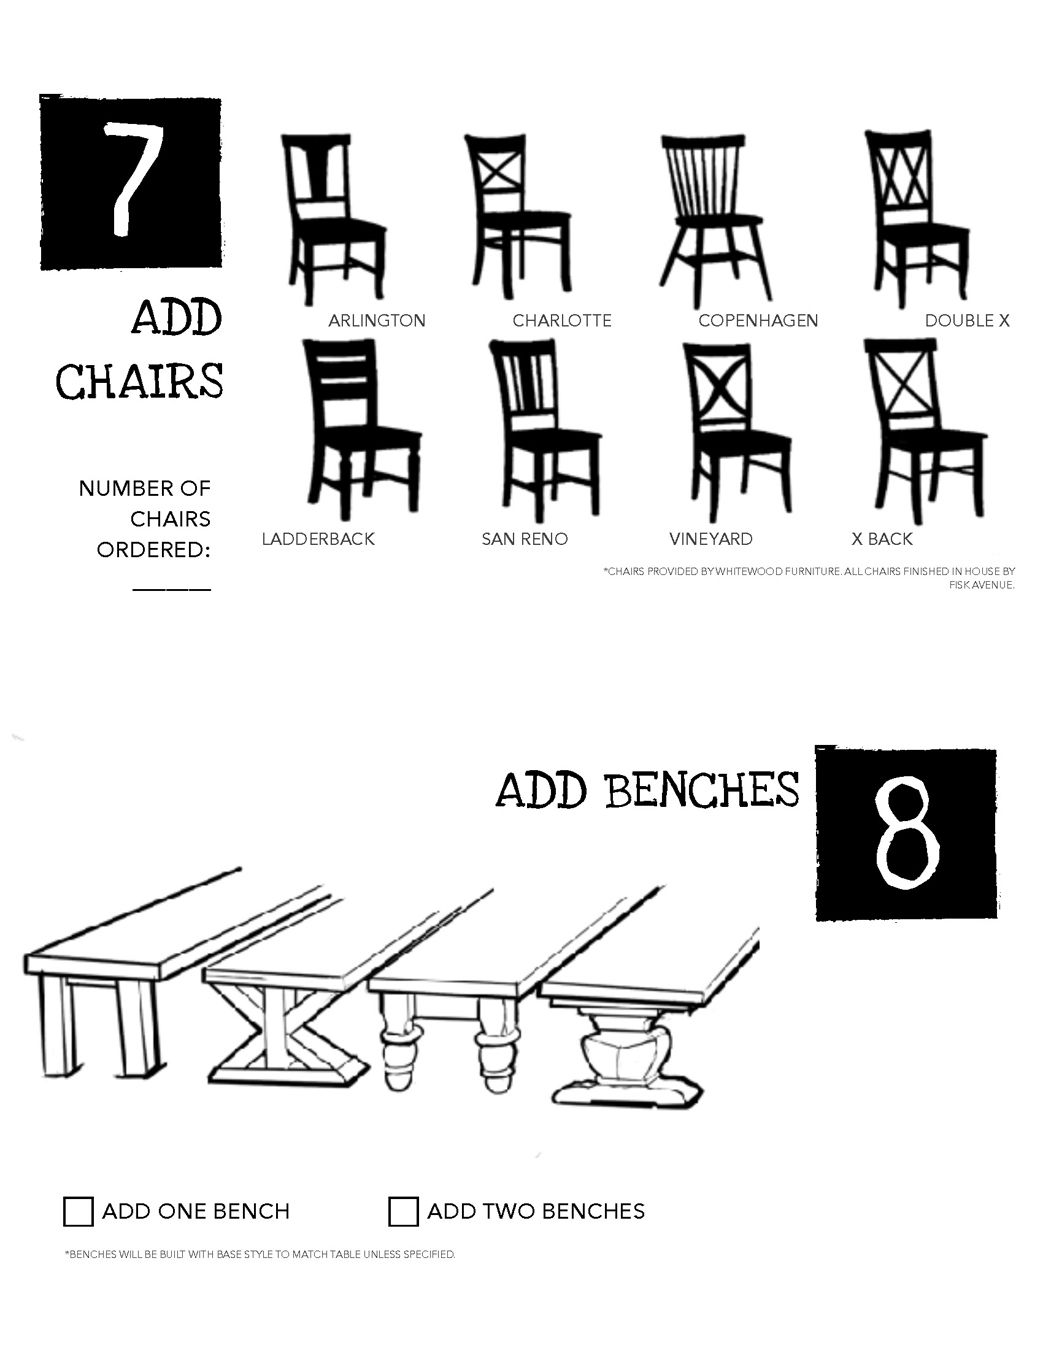 Table_Sales_Infographic01 (1)_Page_4.jpg